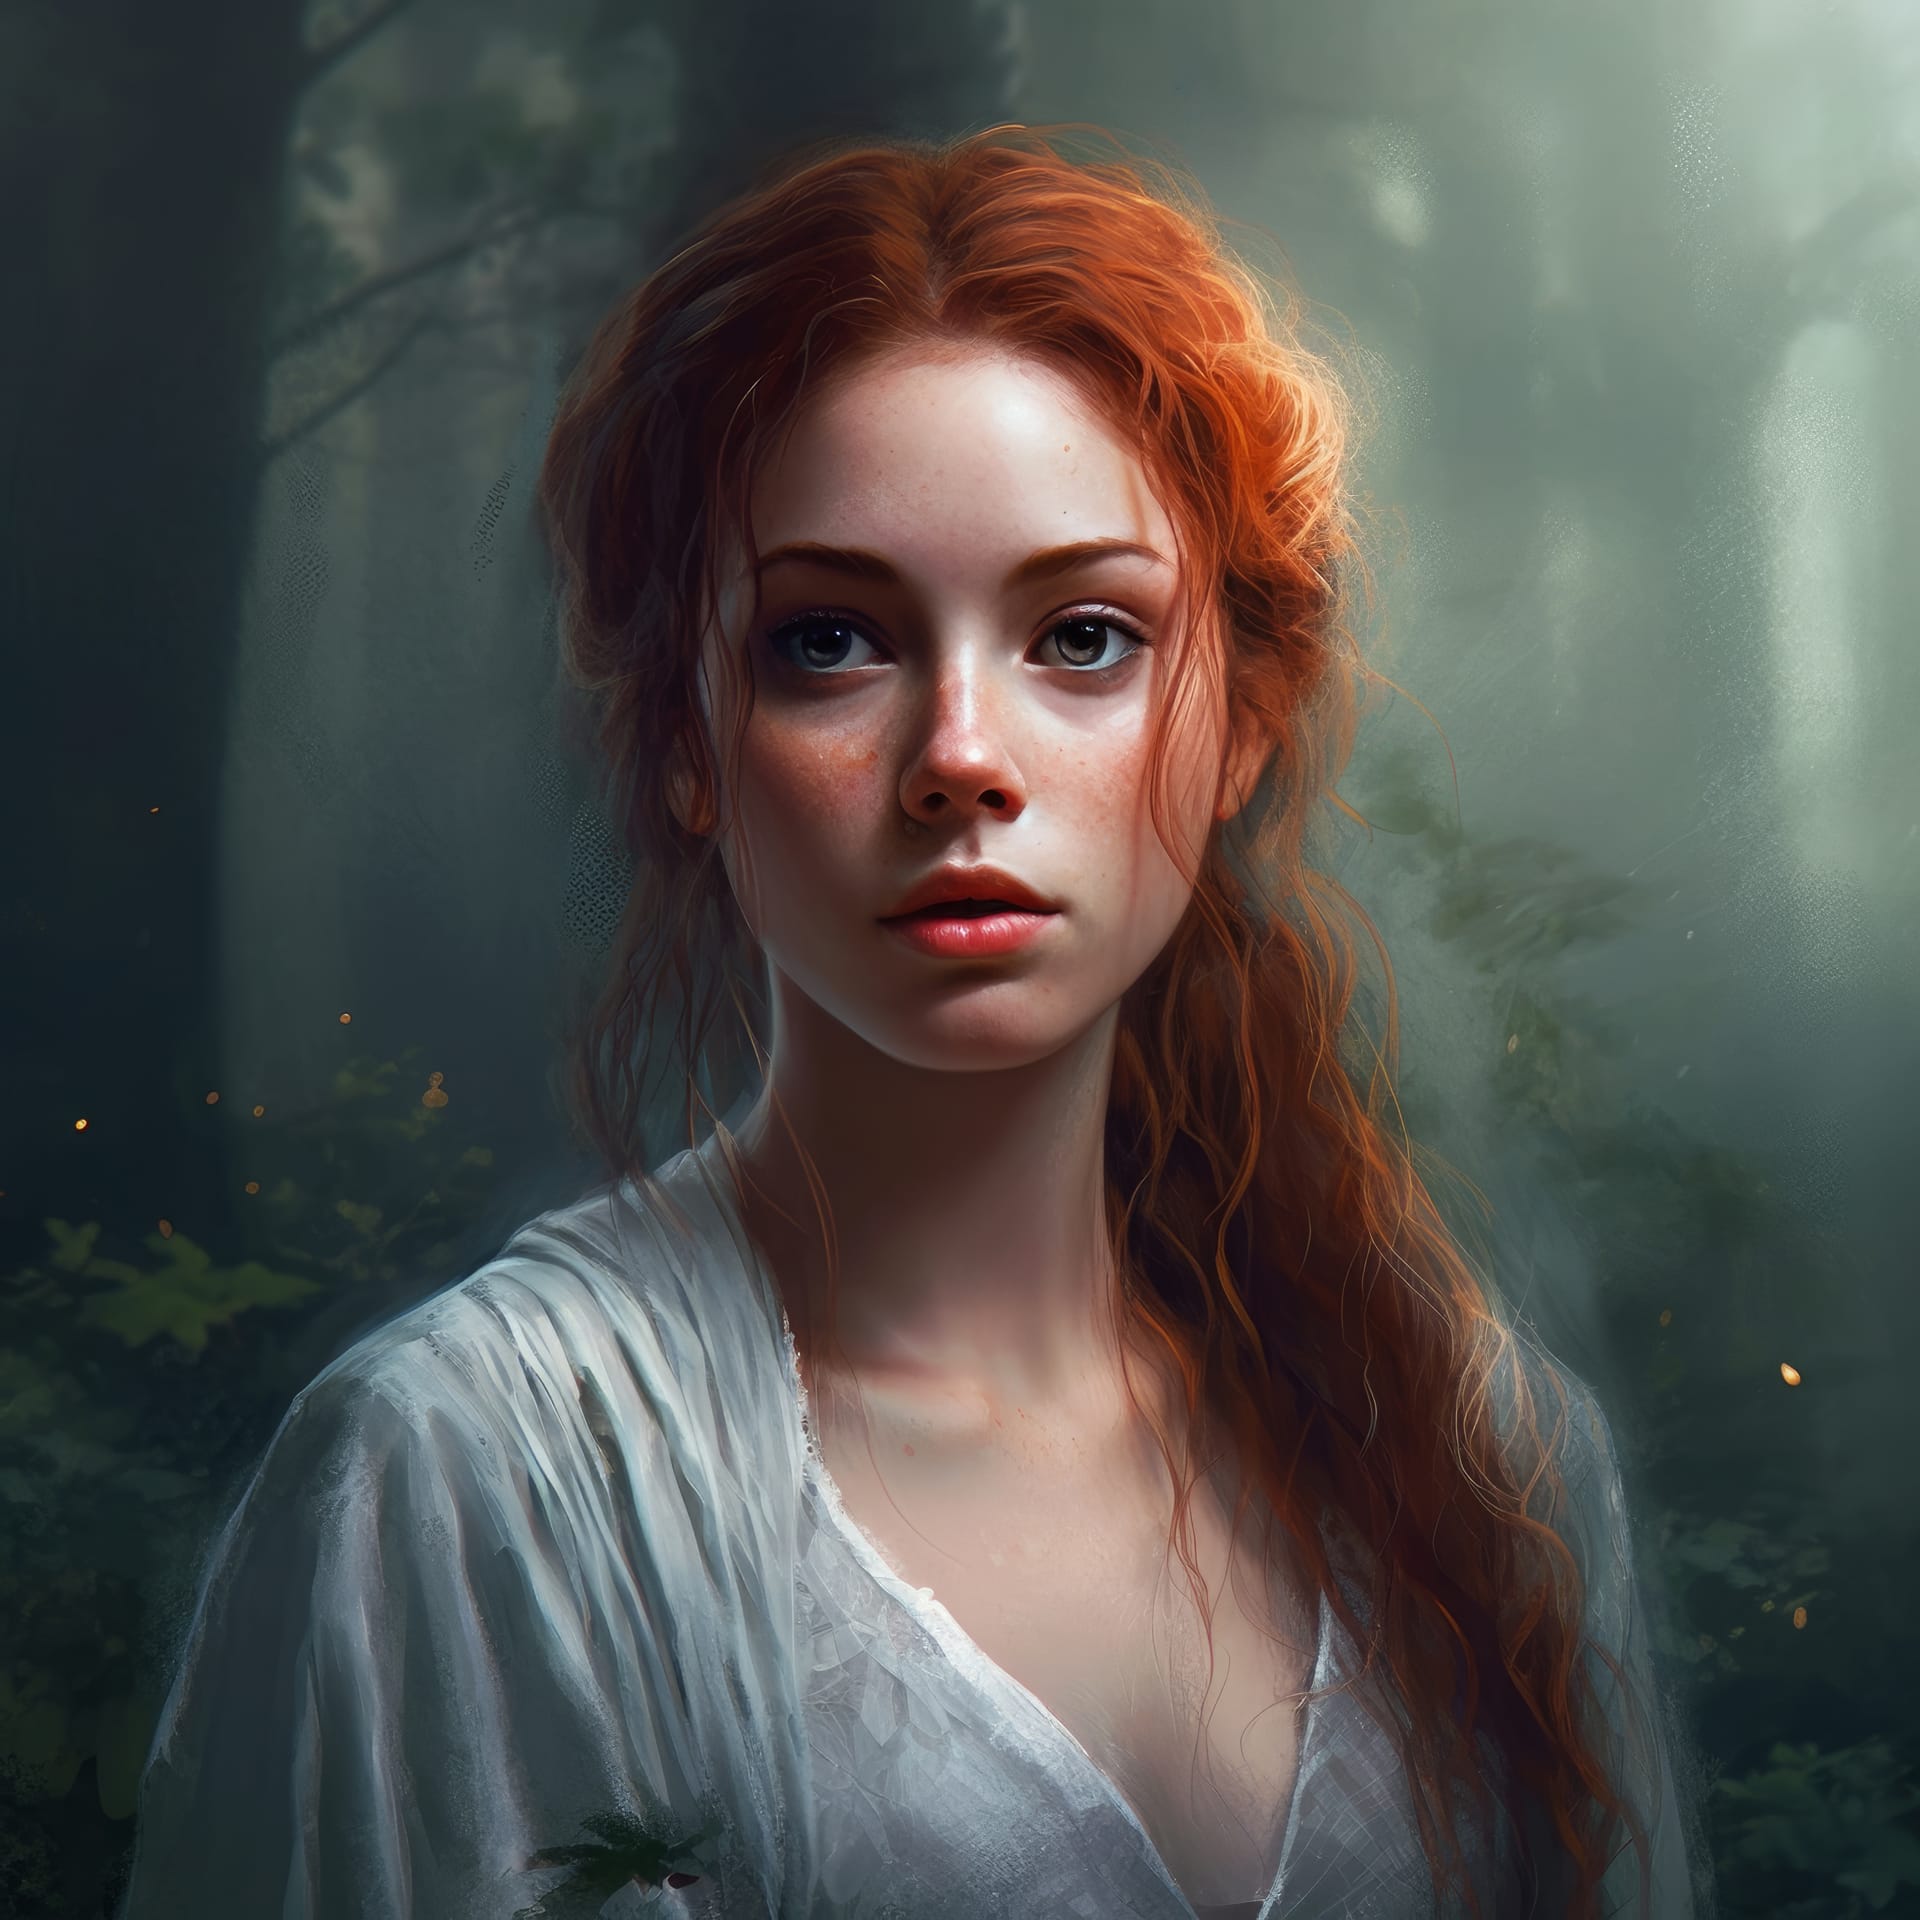 Woman with red hair white shirt is standing forest